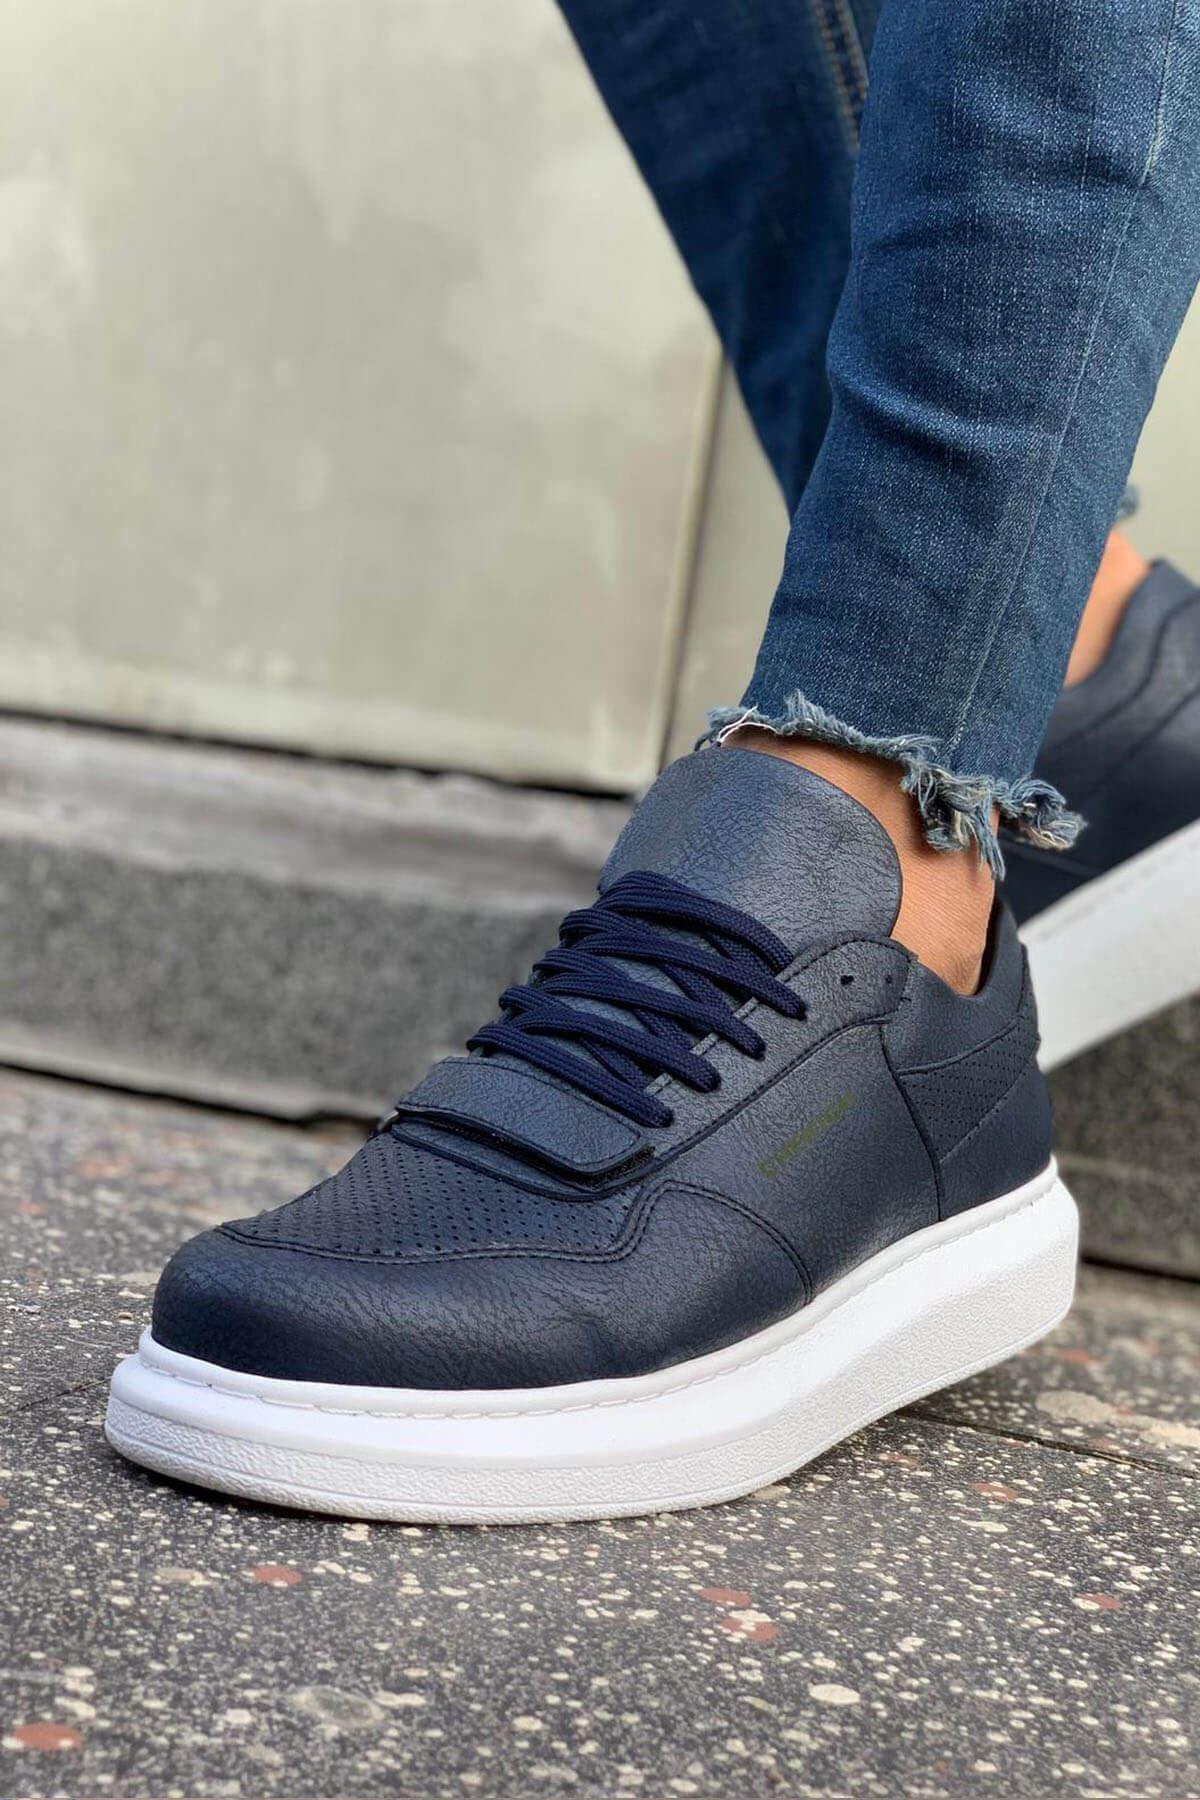 CH073 Men's Unisex Navy Blue Lace-Up Casual Sneaker Sports Shoes - STREET MODE ™